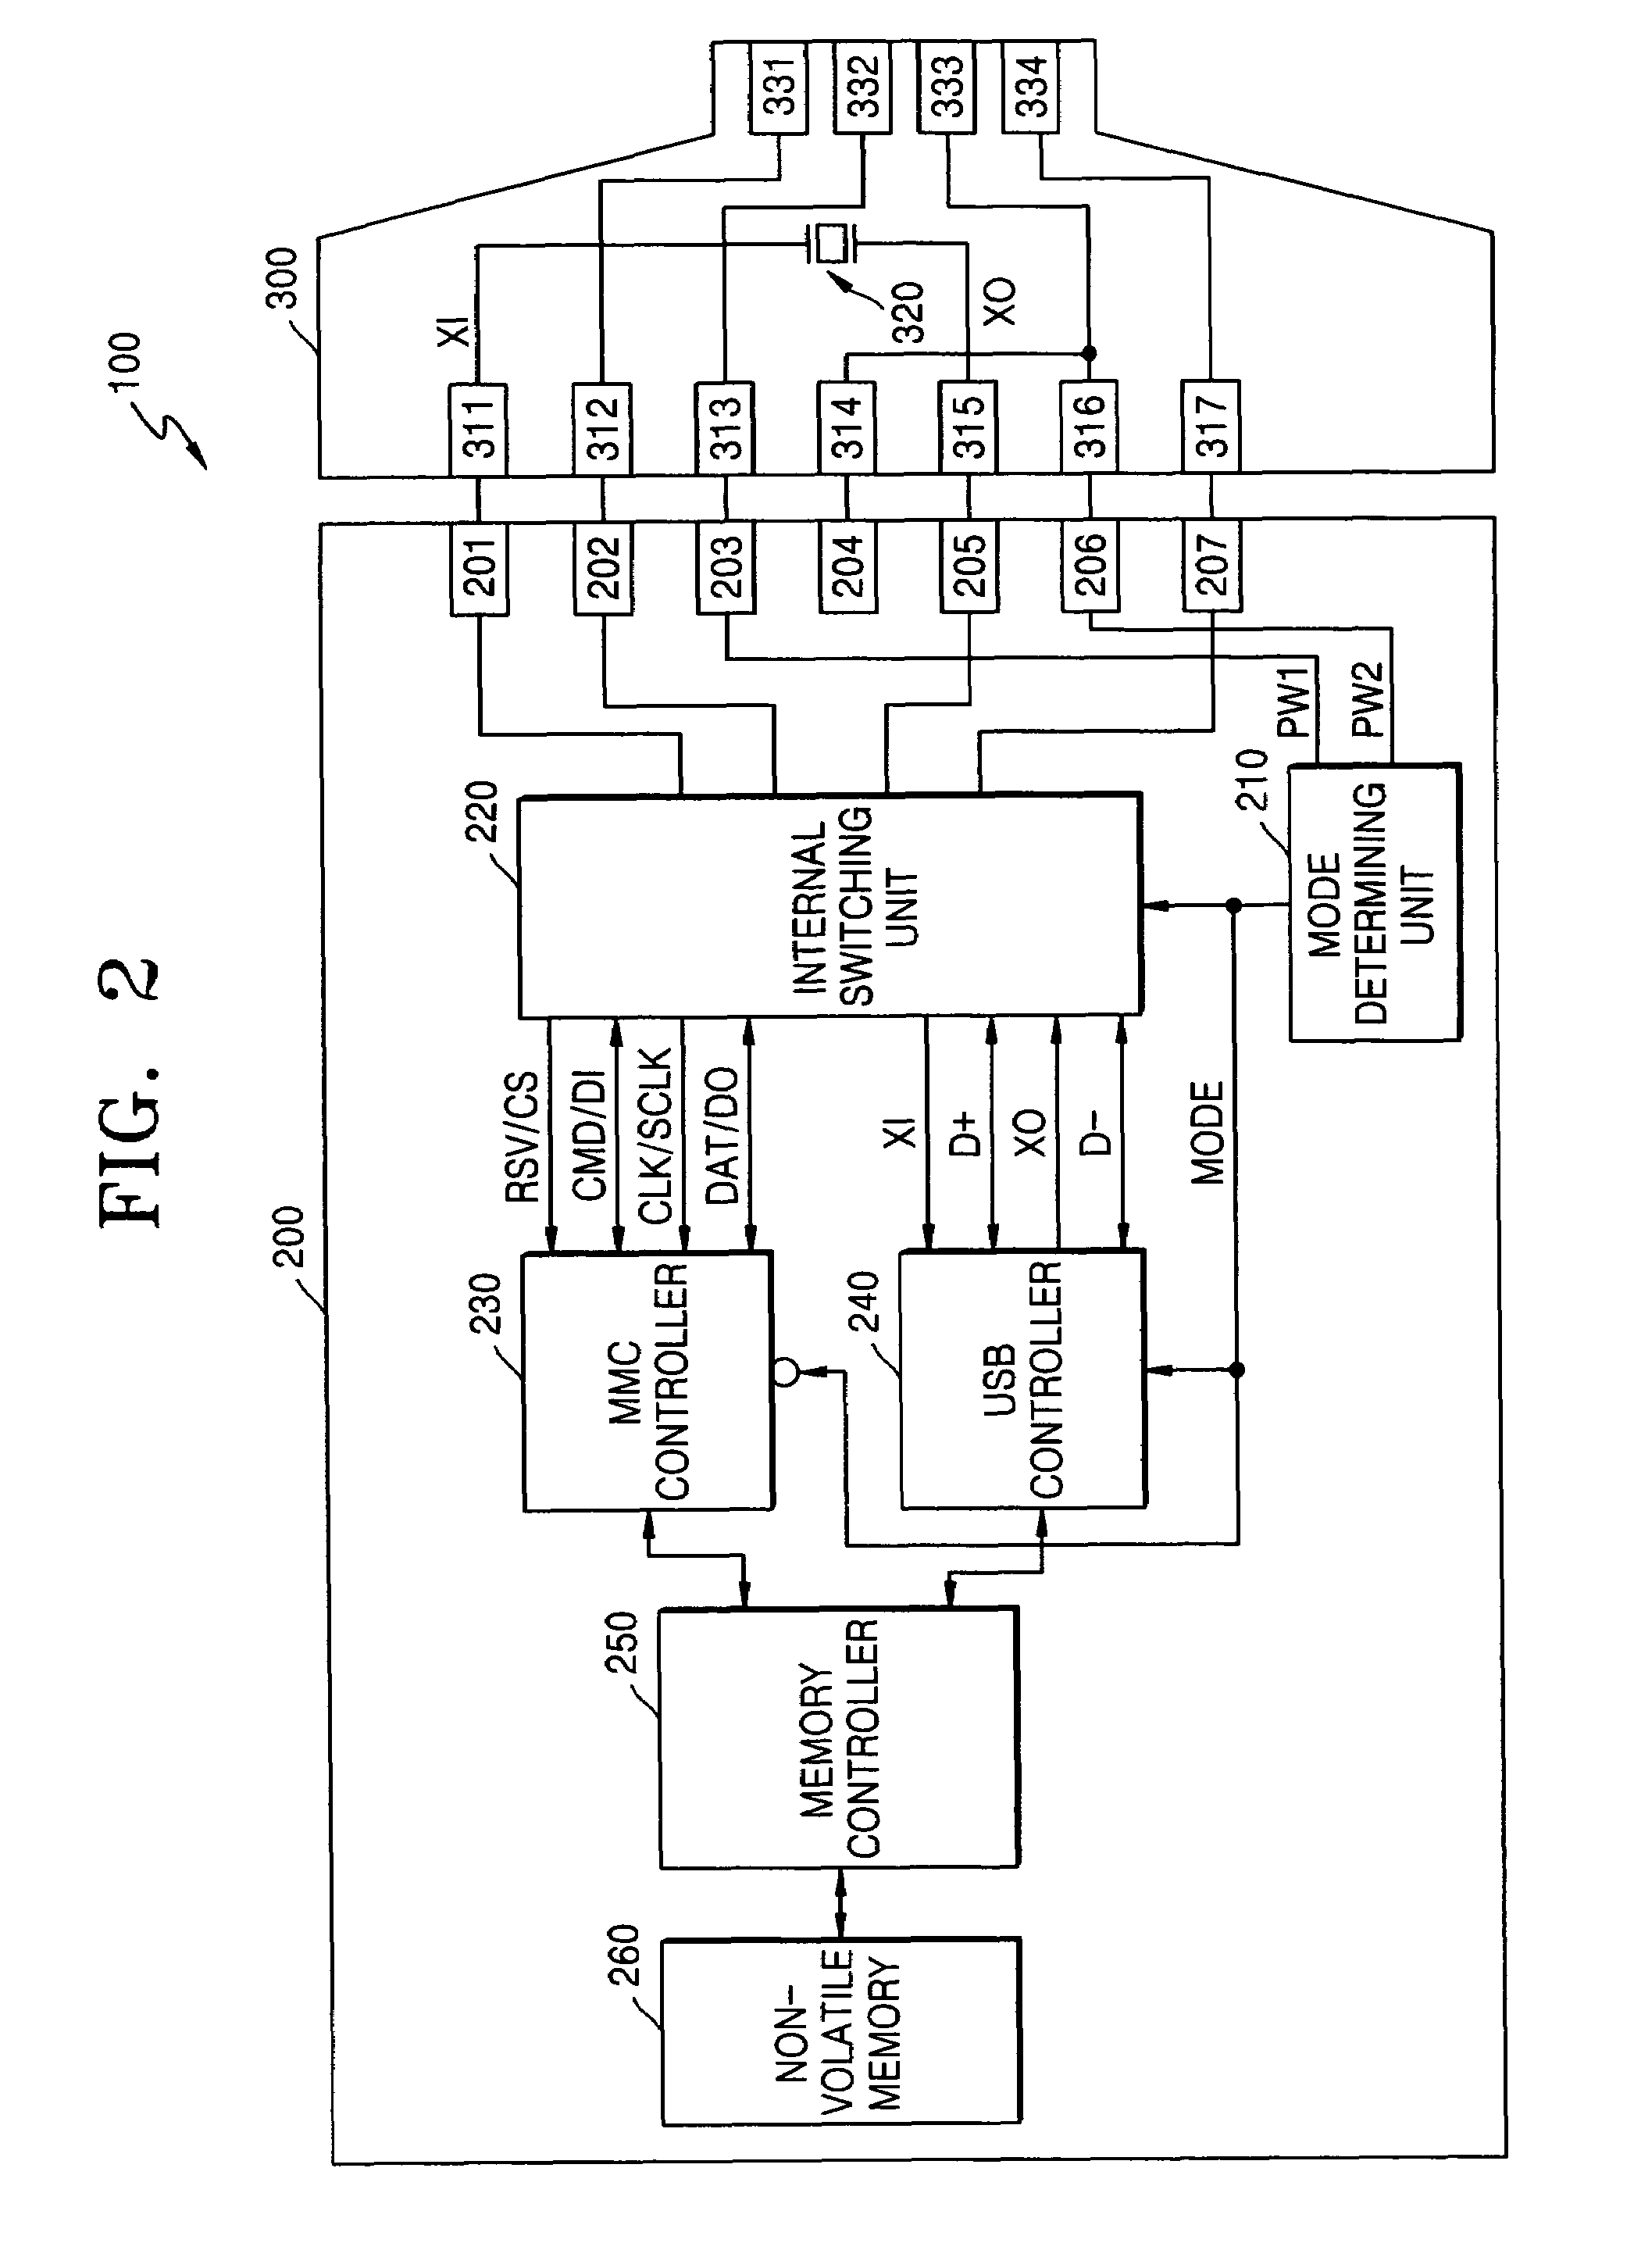 Multimedia/secure digital cards and adapters for interfacing using voltage levels to determine host types and methods of operating